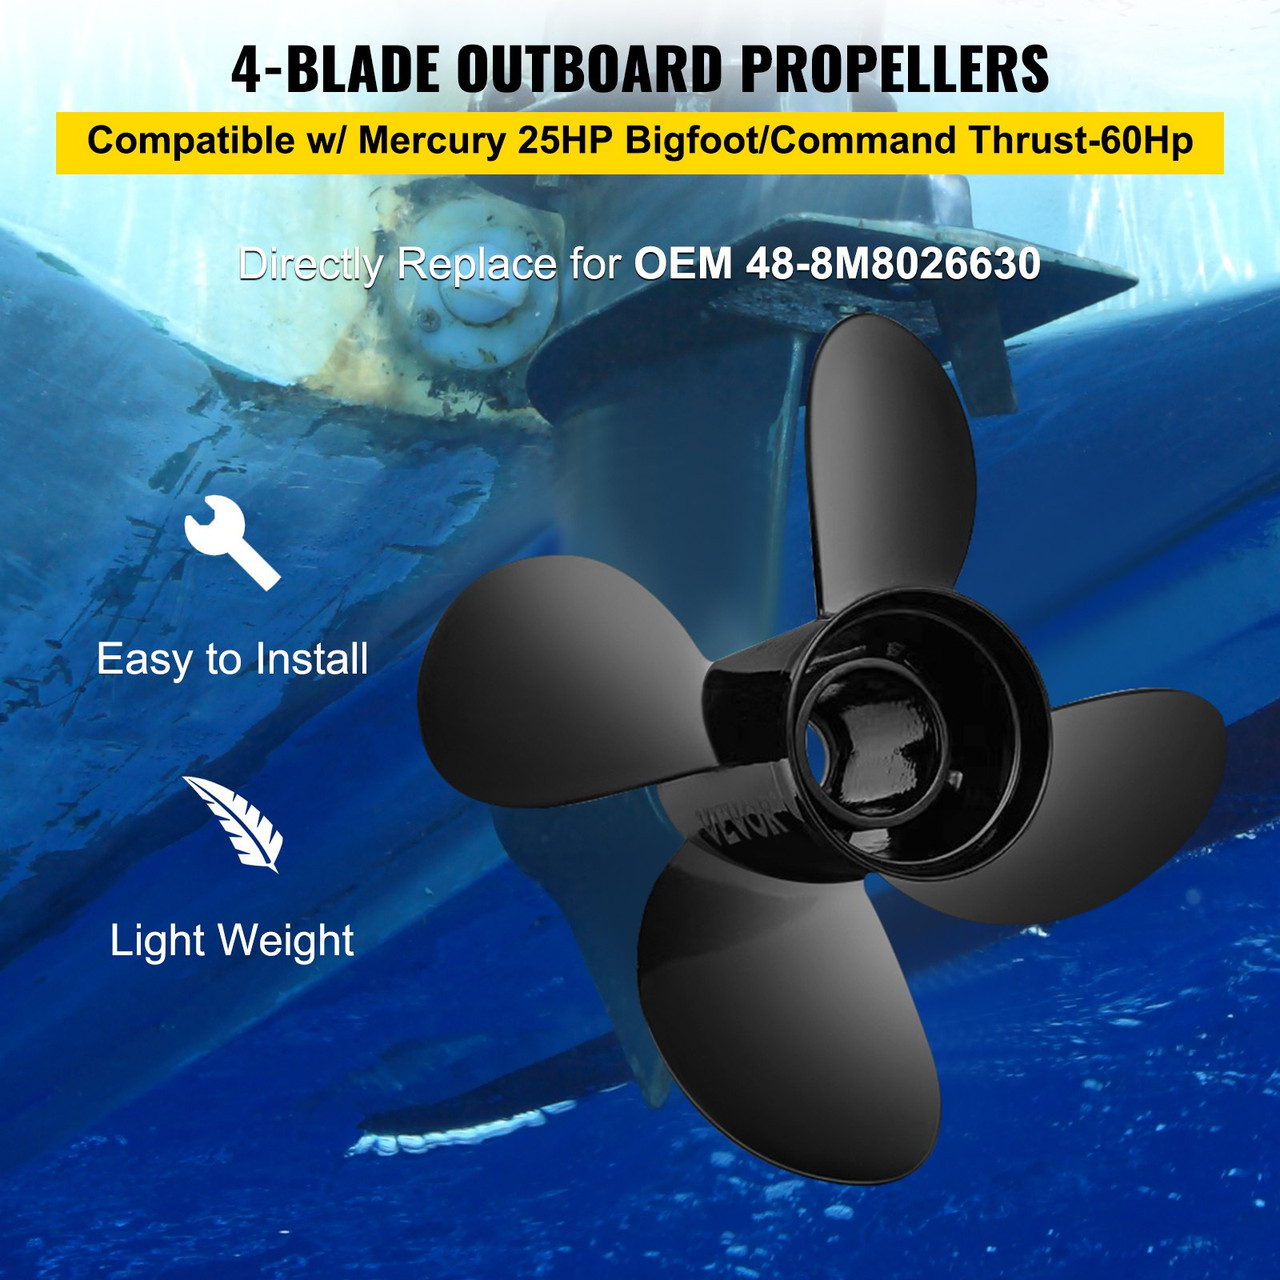 VEVOR Outboard Propeller, Replace for OEM 48-8M8026630, 4-Blade 10.3" x 13" Aluminum Boat Propeller, Compatible with Mercury Mariner 25HP Bigfoot/Command Thrust 60Hp Outboard, 13 Tooth Splines, RH